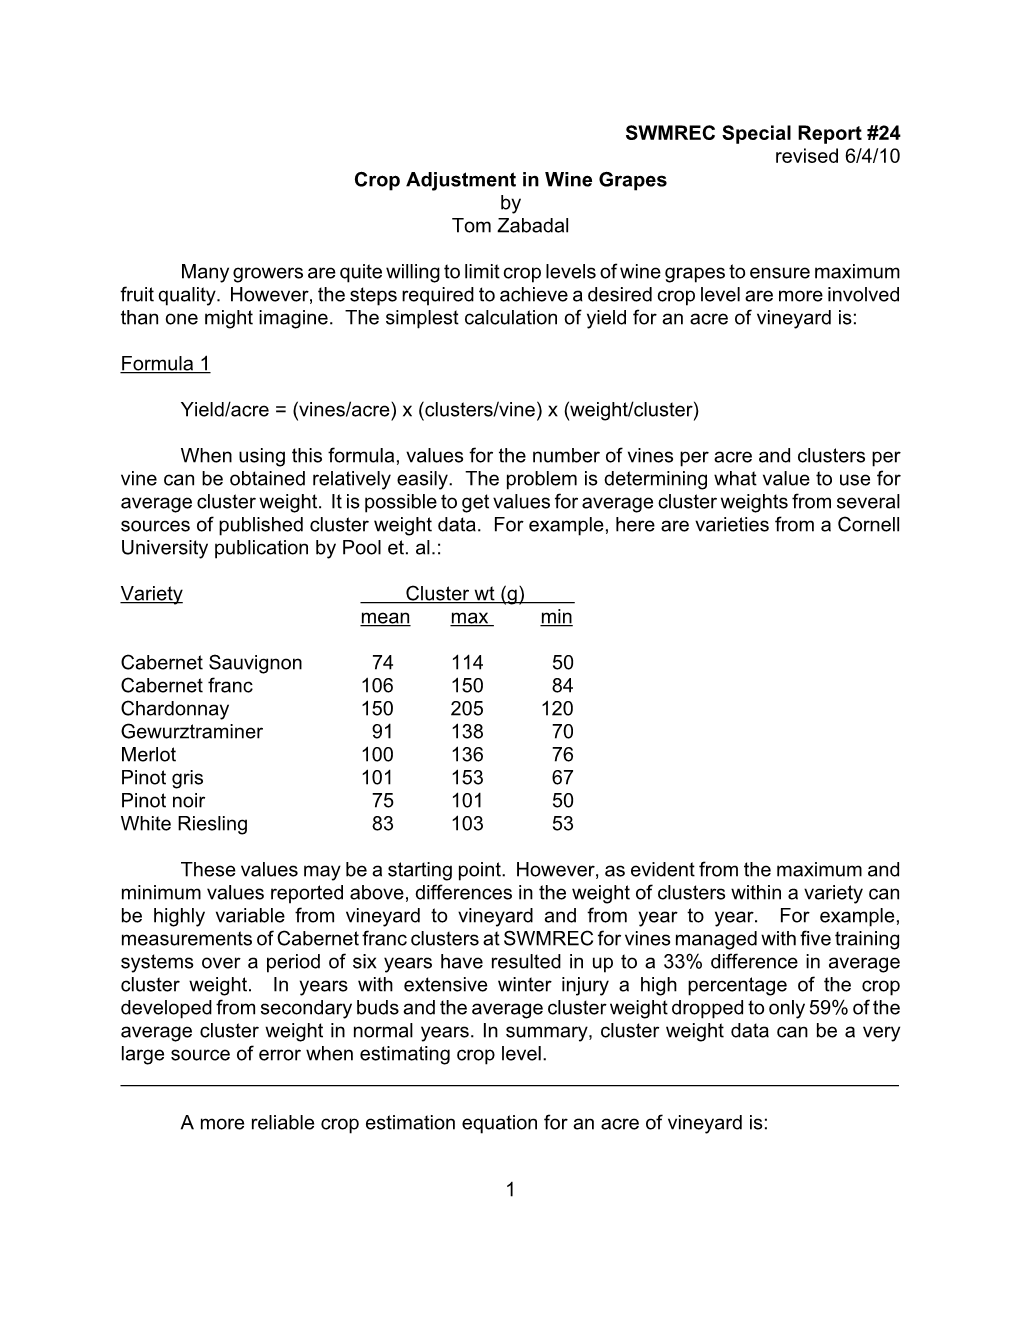 Crop Adjustment in Wine Grapes by Tom Zabadal